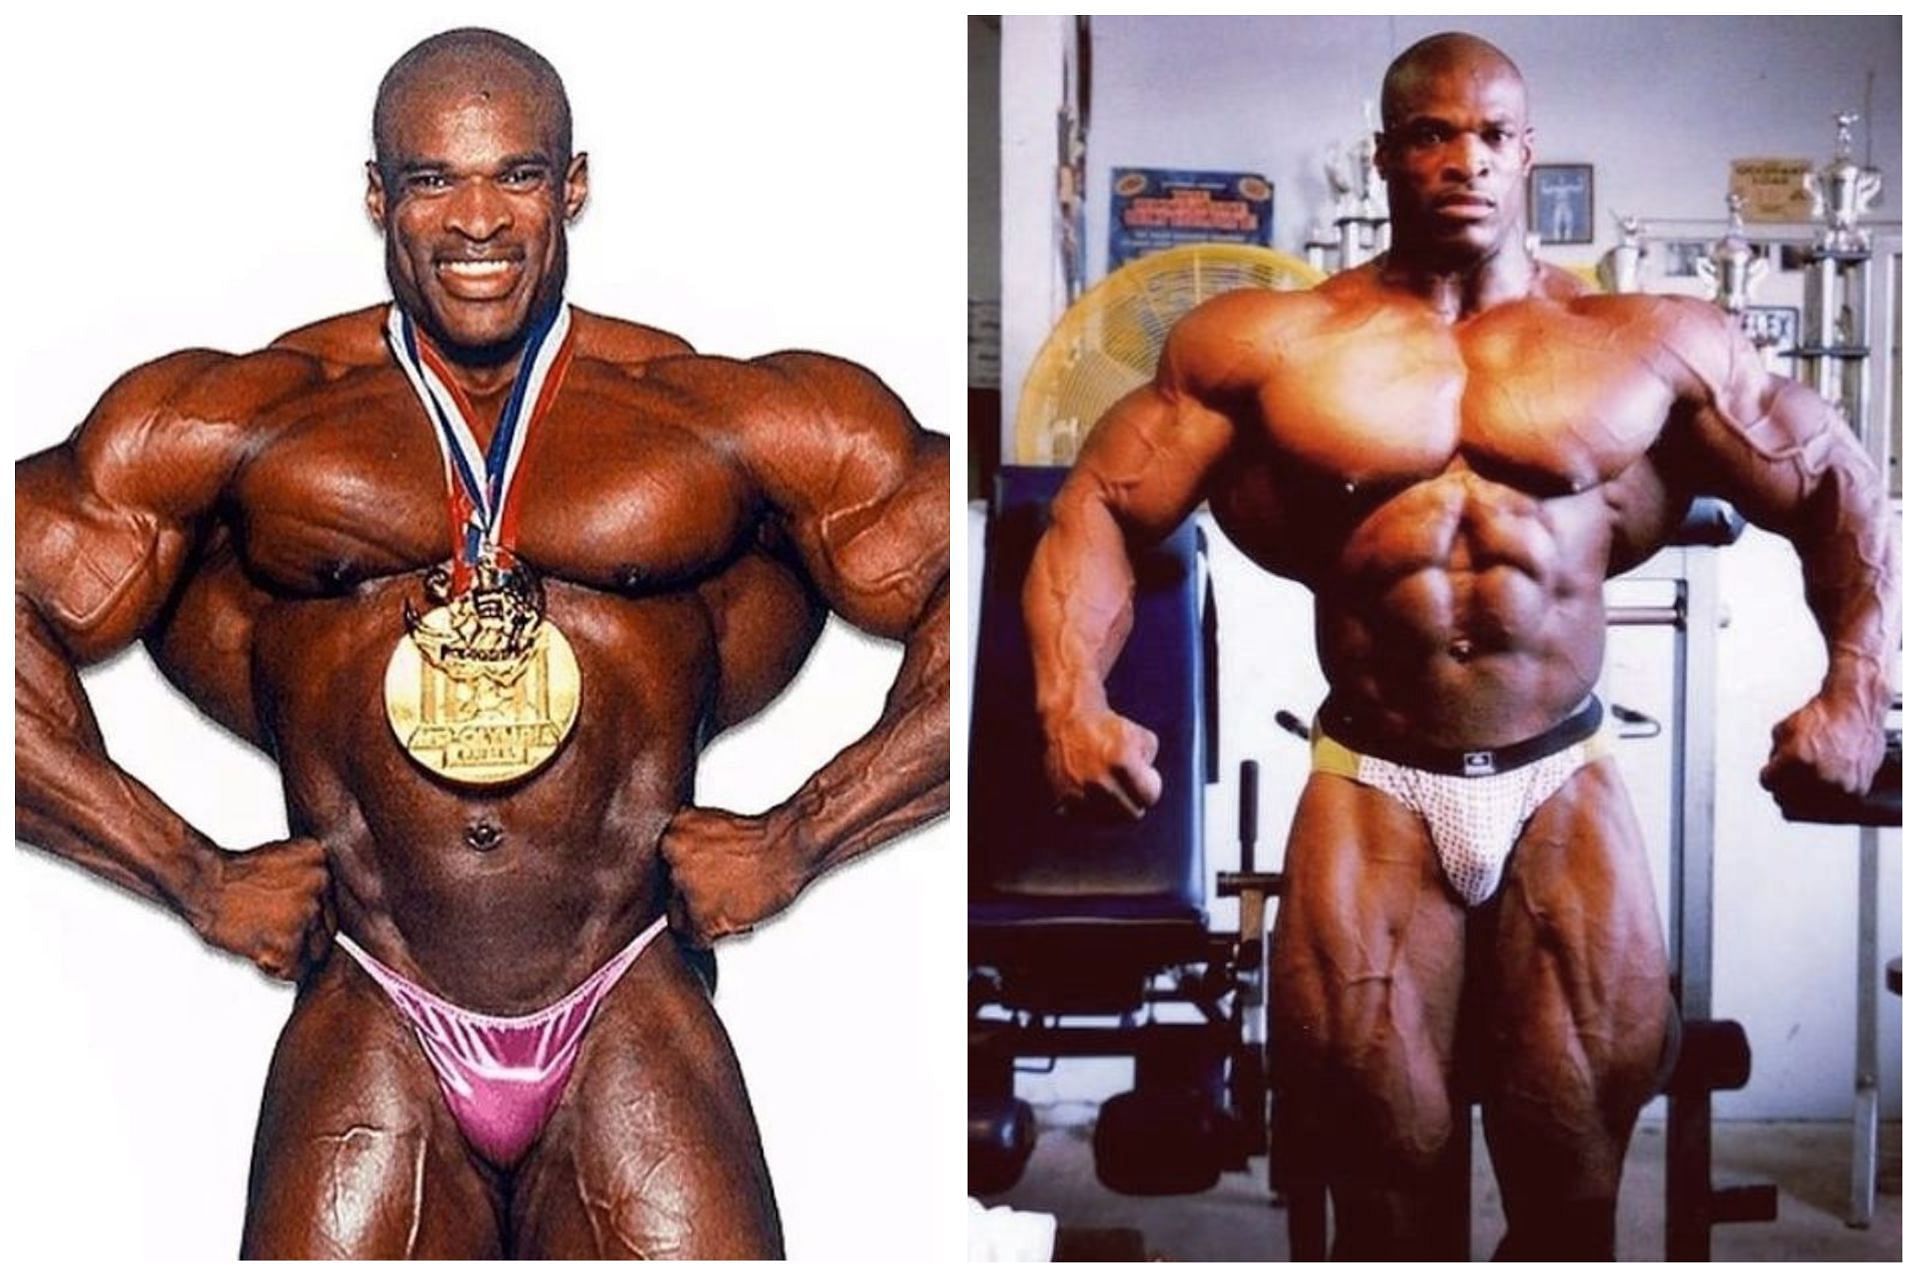 Eight time Mr. Olympia Ronnie Coleman poses for the camera, showing off his massive physique (Image via Instagram @ronniecoleman8)